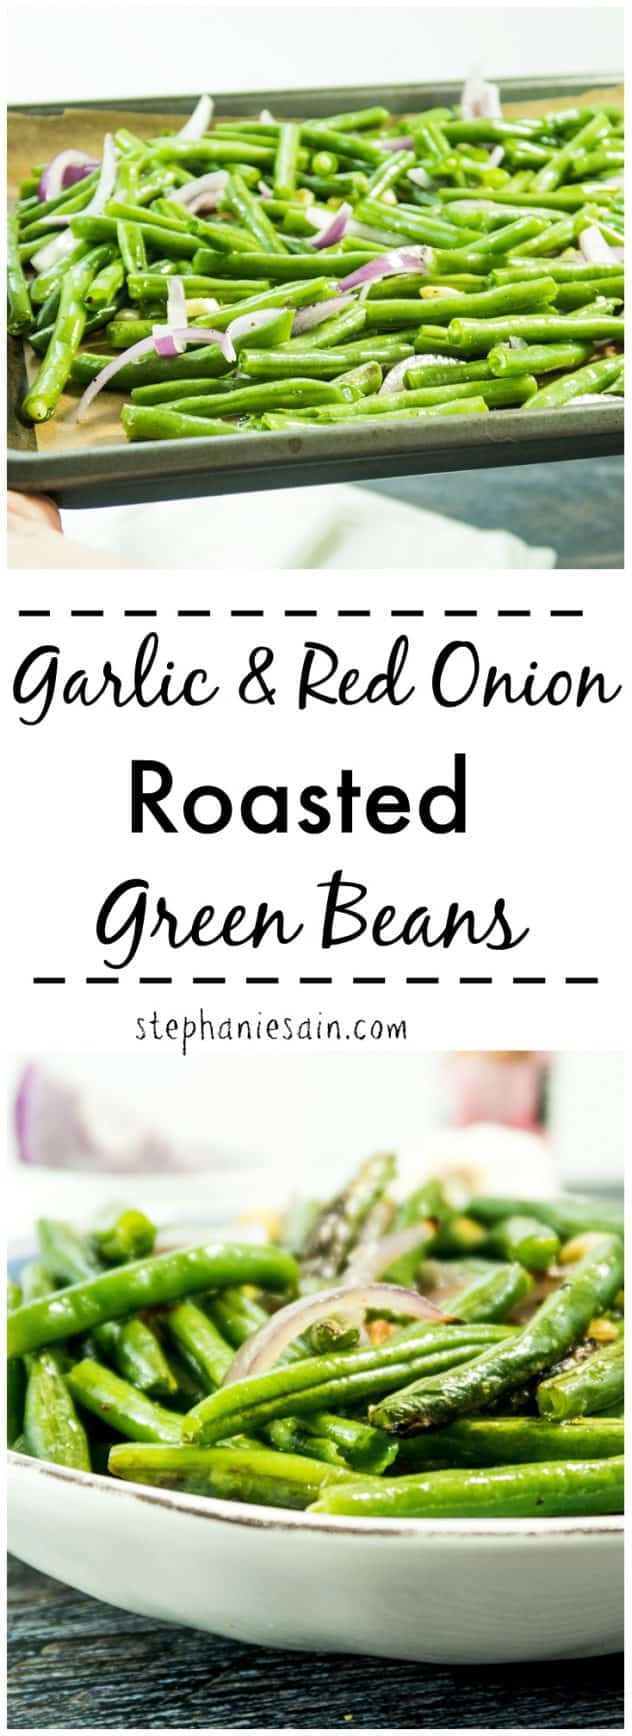 These Garlic and Red Onion Roasted Green Beans are super Easy to prepare, delicious and Only require 5 ingredients. The perfect side for almost anything. Vegan & Gluten Free.